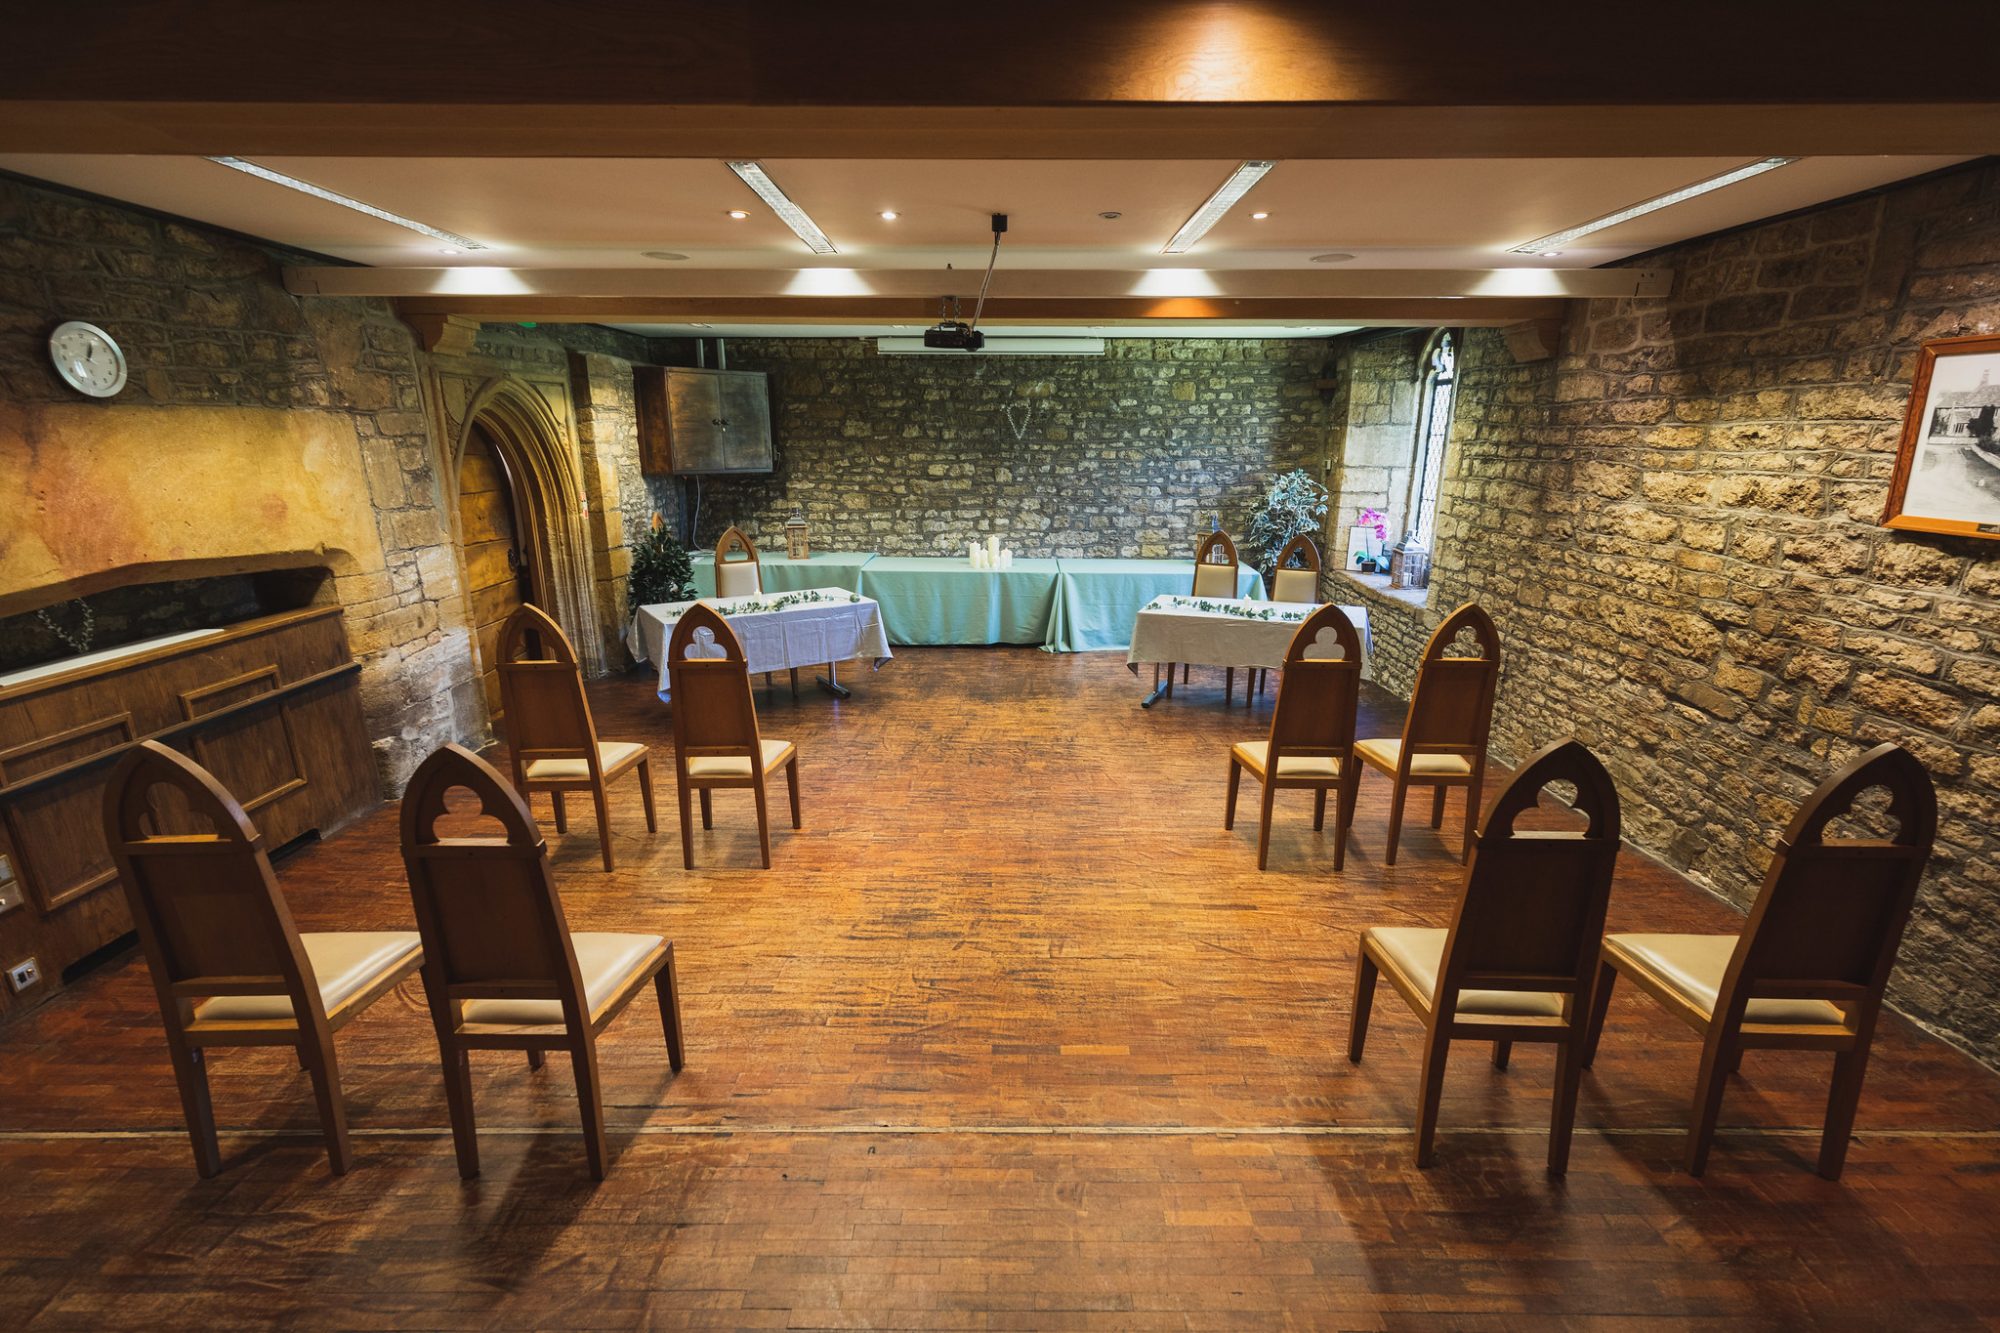 ceremony room with old bare stone walls, medieval style chairs either side of a wood floored aisle.